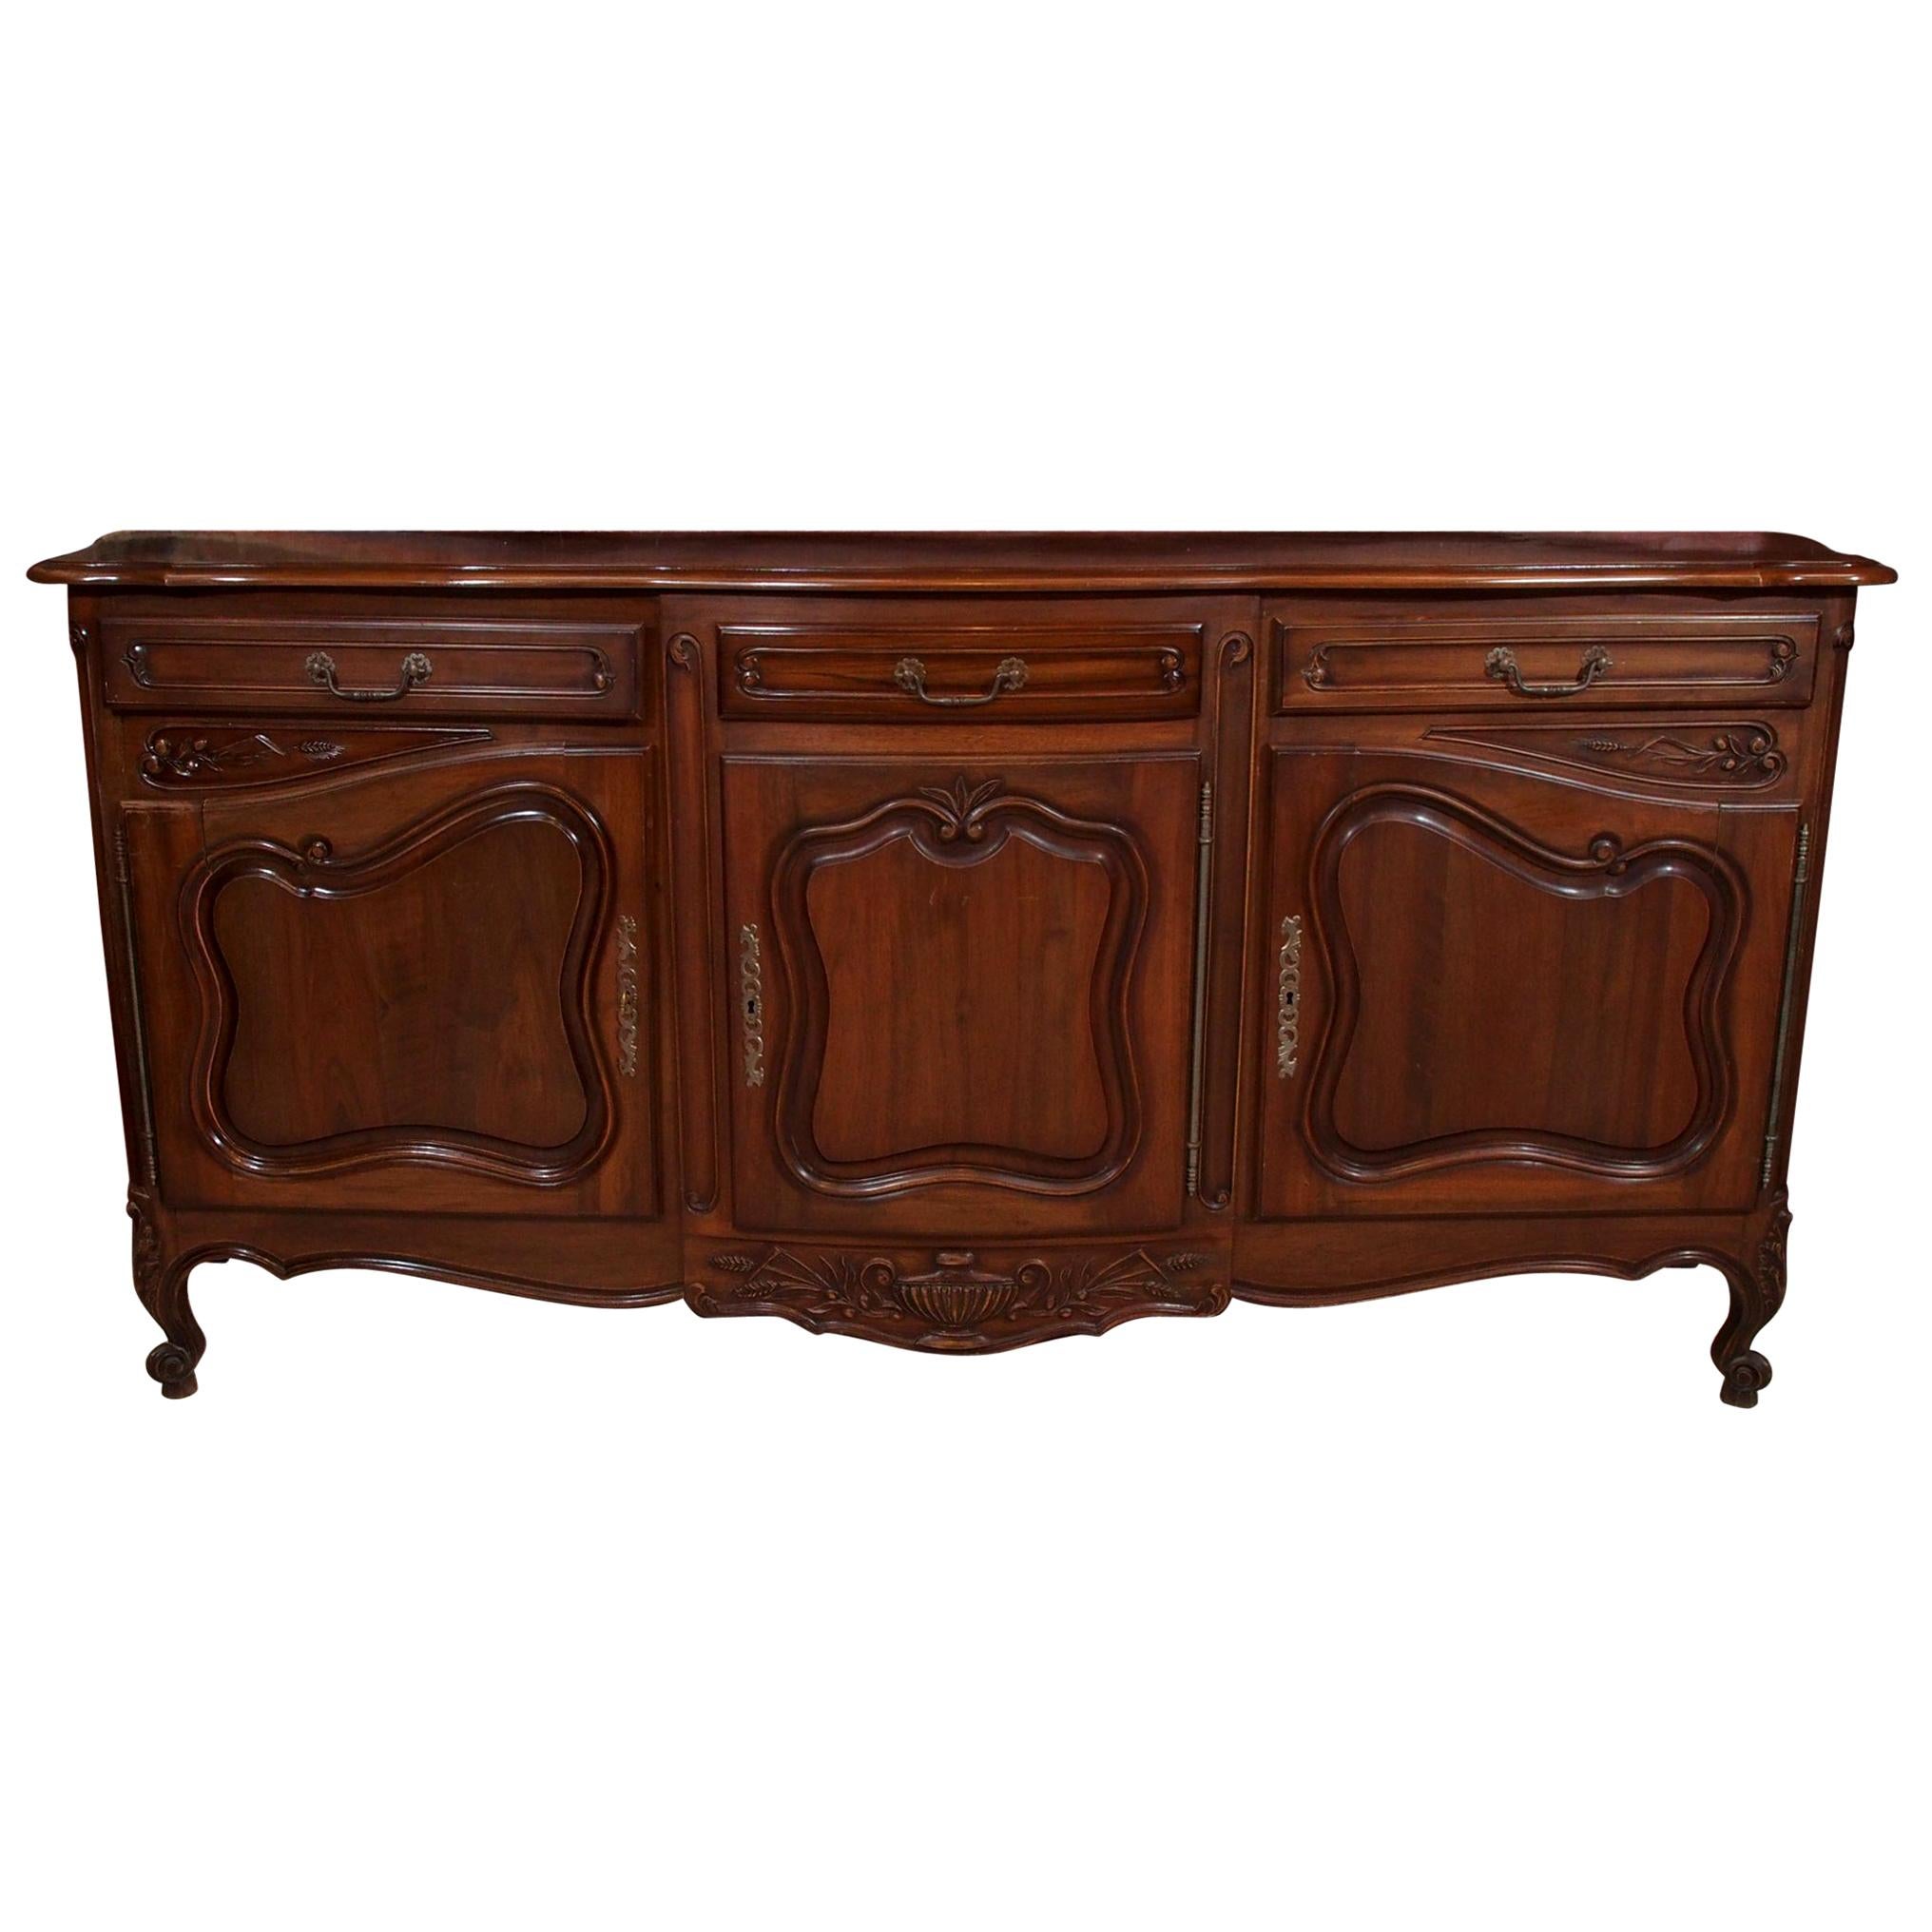 Antique French Provincial Walnut Sideboard, circa 1900 For Sale